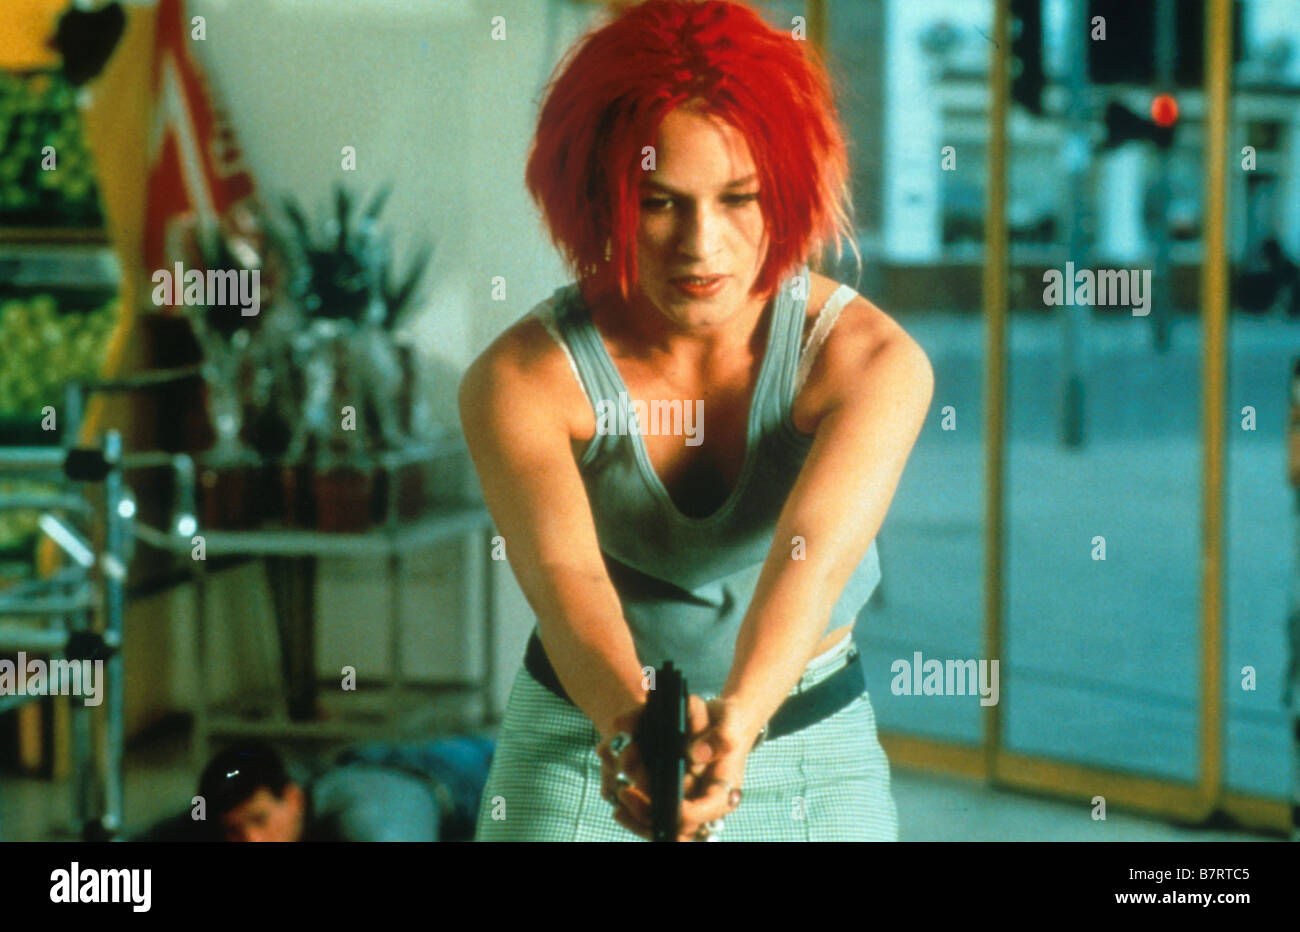 Run Lola Run High Resolution Stock Photography and Images - Alamy